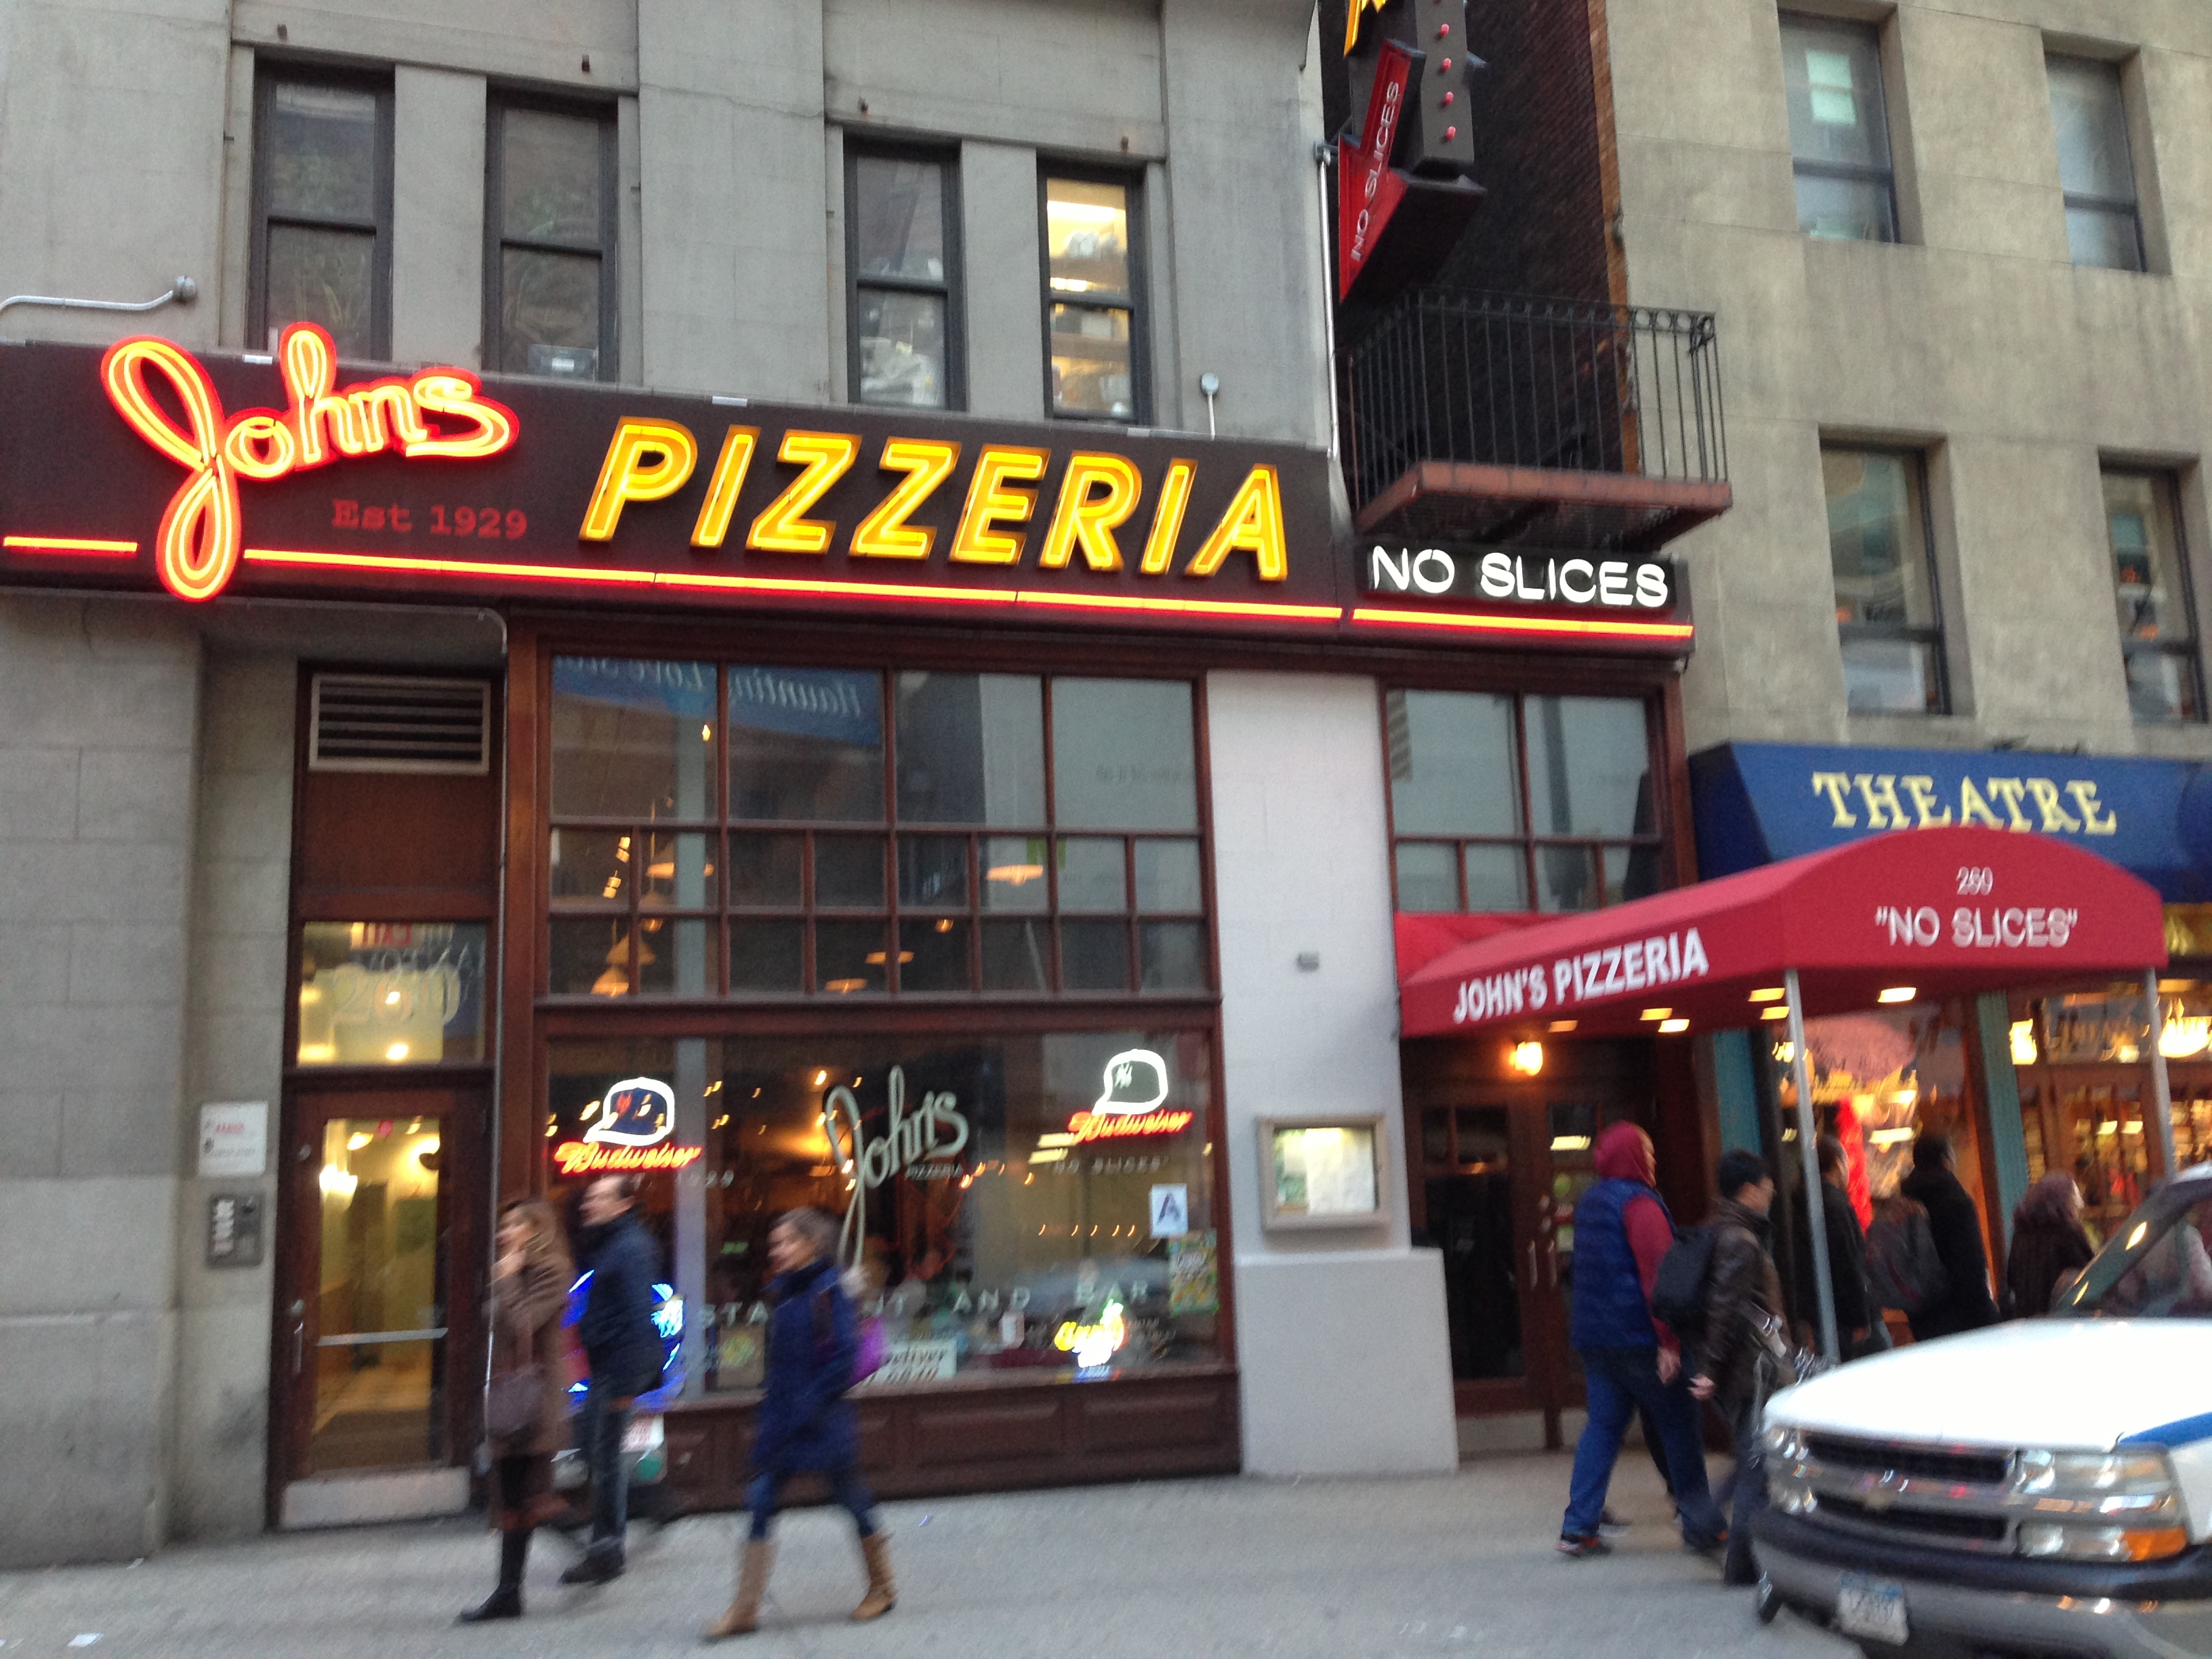 John's Pizzeria in New York offers affordable eats